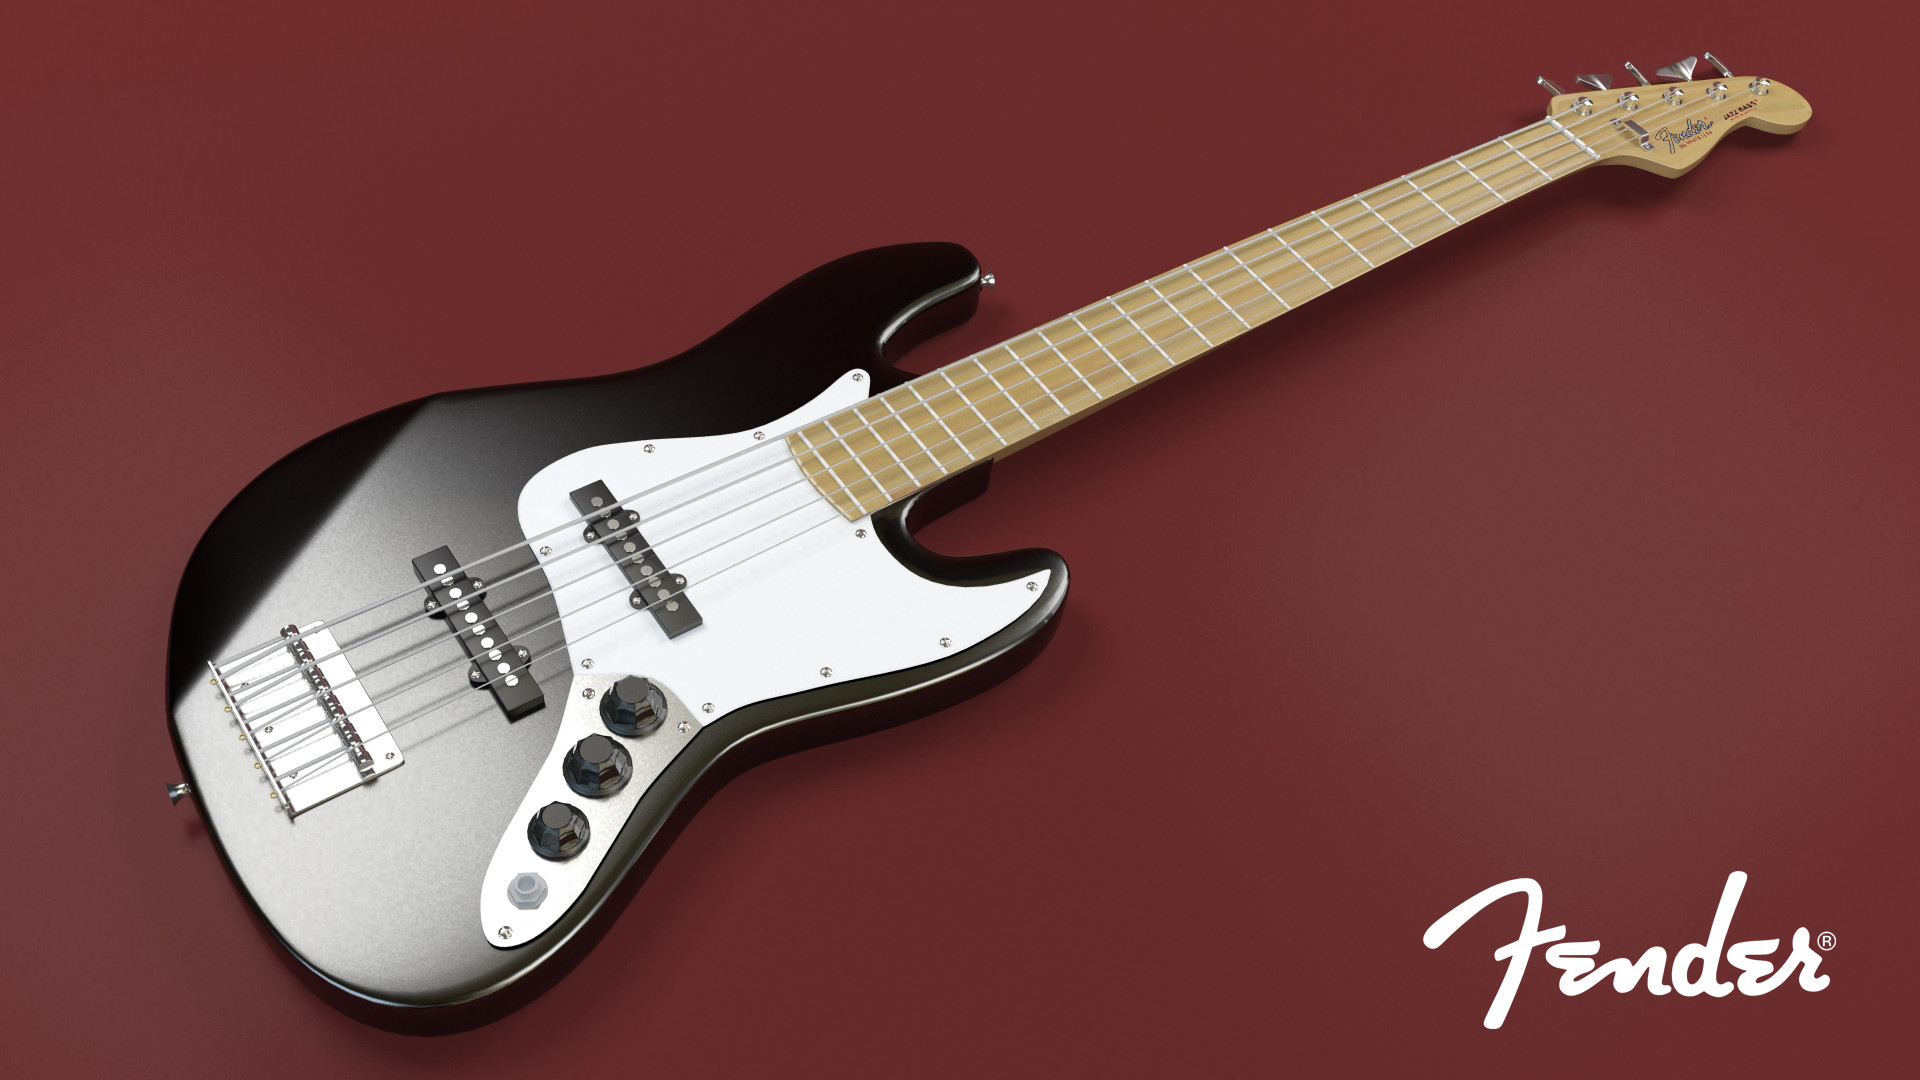 1920x1080 hd - Awesome fender guitar wallpapers - Awesome bass guitar wallpaper .